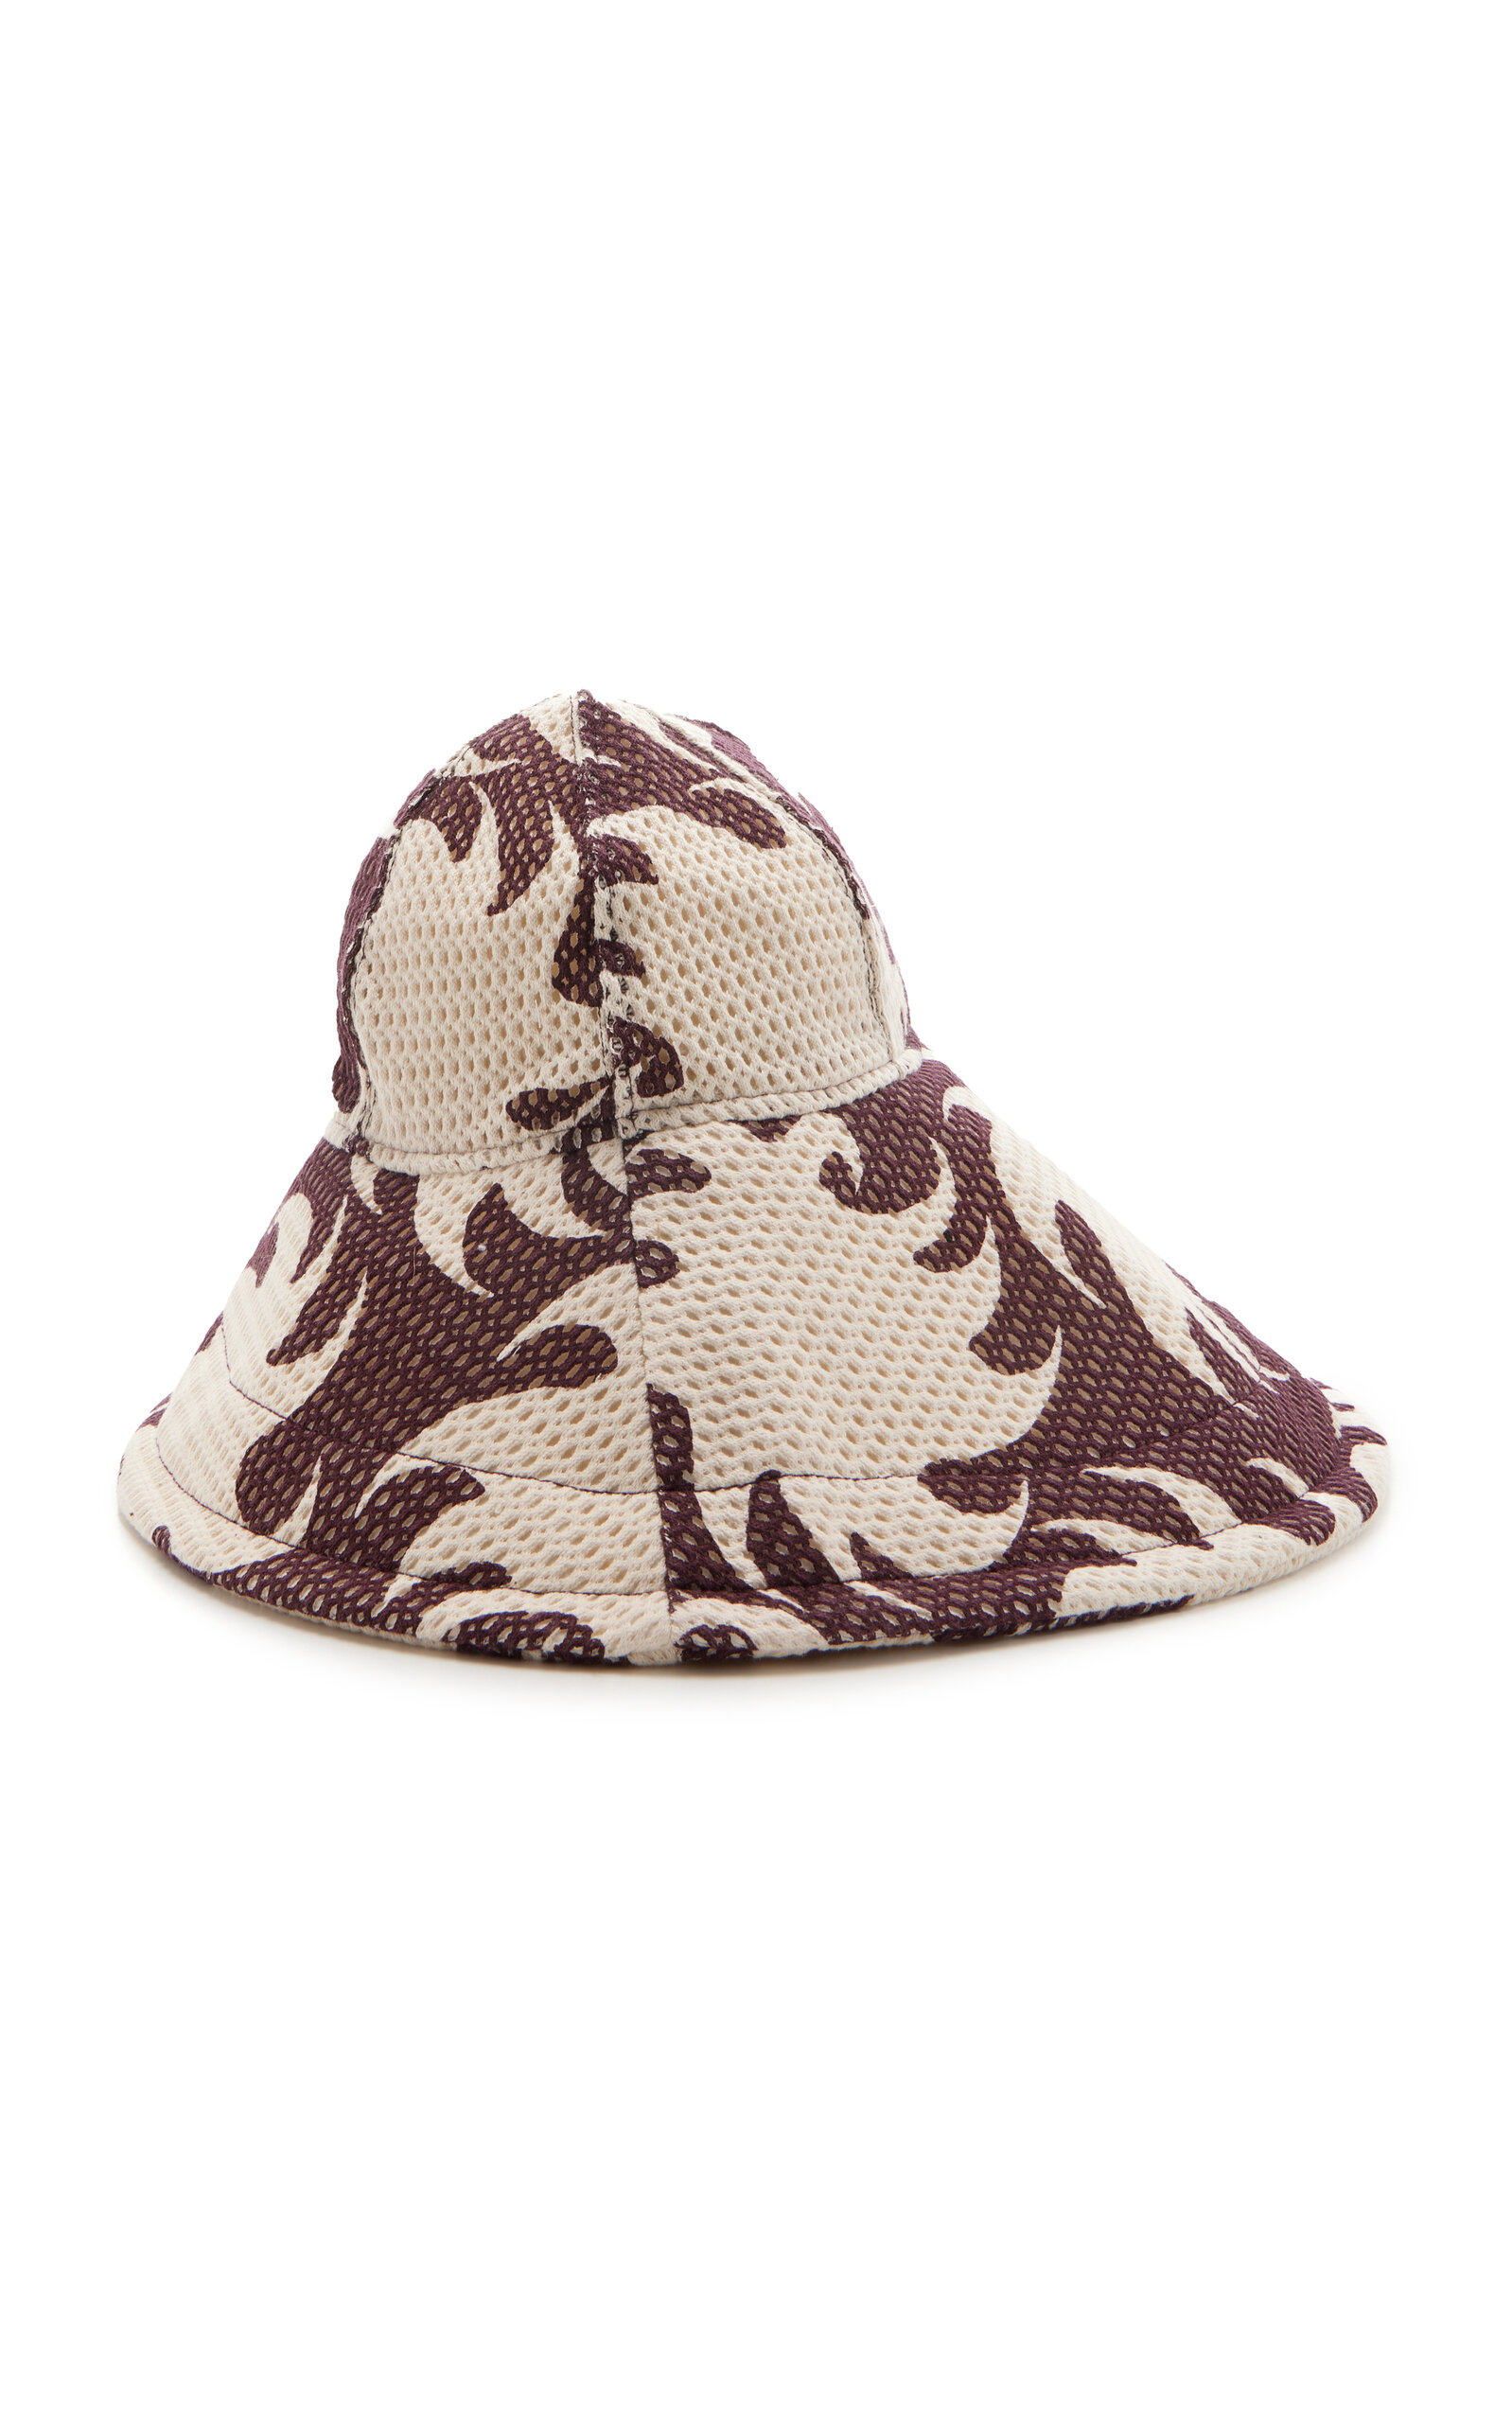 Exclusive Ember Netted Cotton Sun Hat